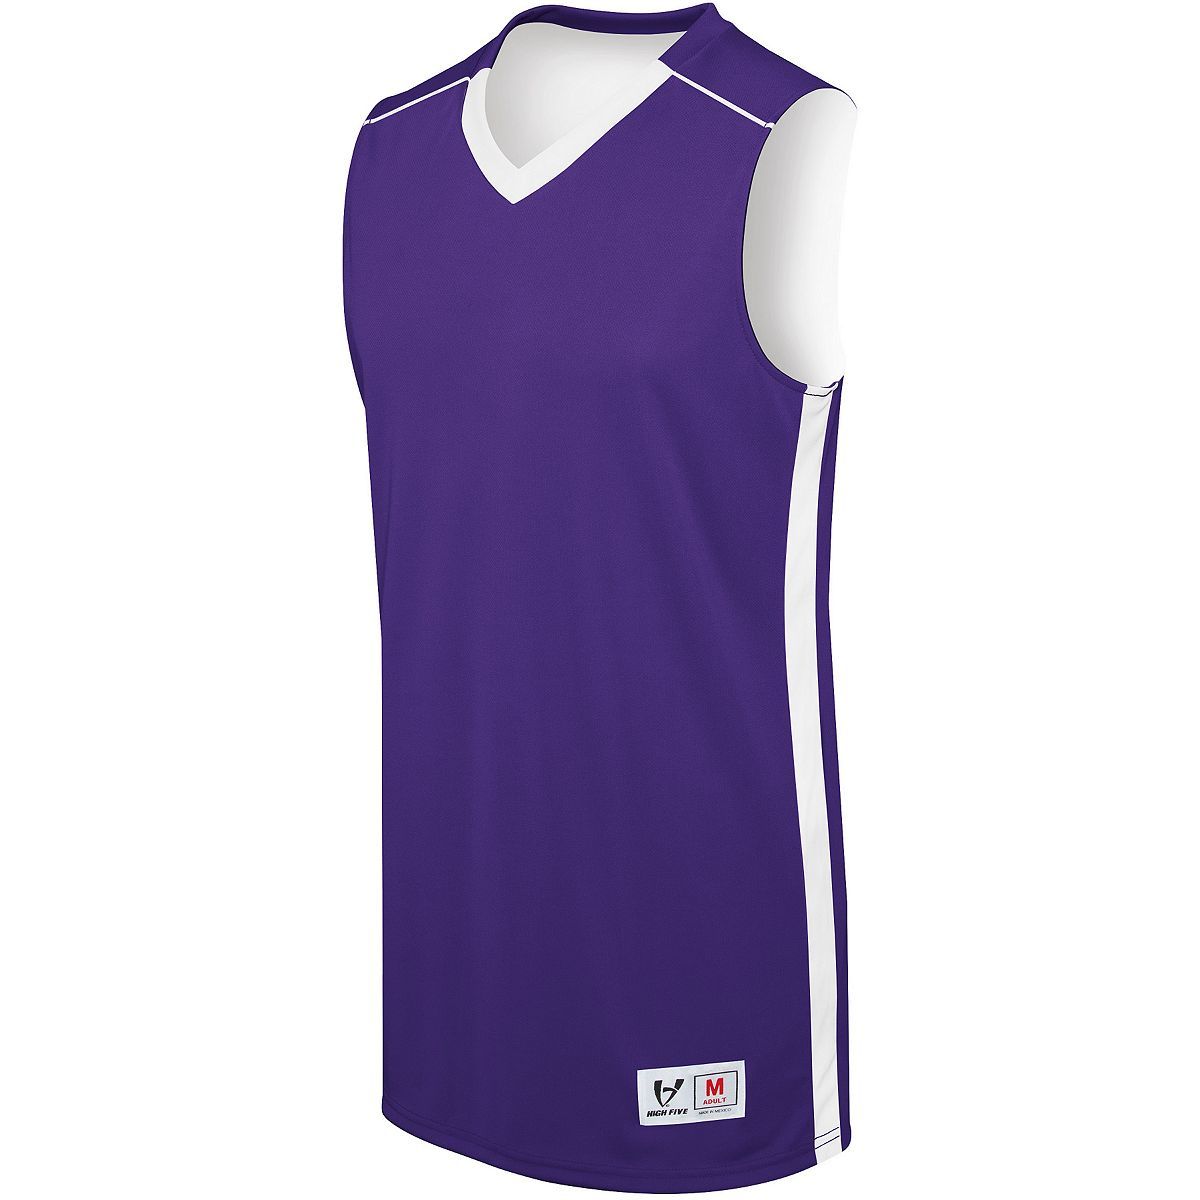 Augusta Sportswear Adult Competition Reversible Jersey in Purple/White  -Part of the Adult, Adult-Jersey, Augusta-Products, Basketball, Shirts, All-Sports, All-Sports-1 product lines at KanaleyCreations.com